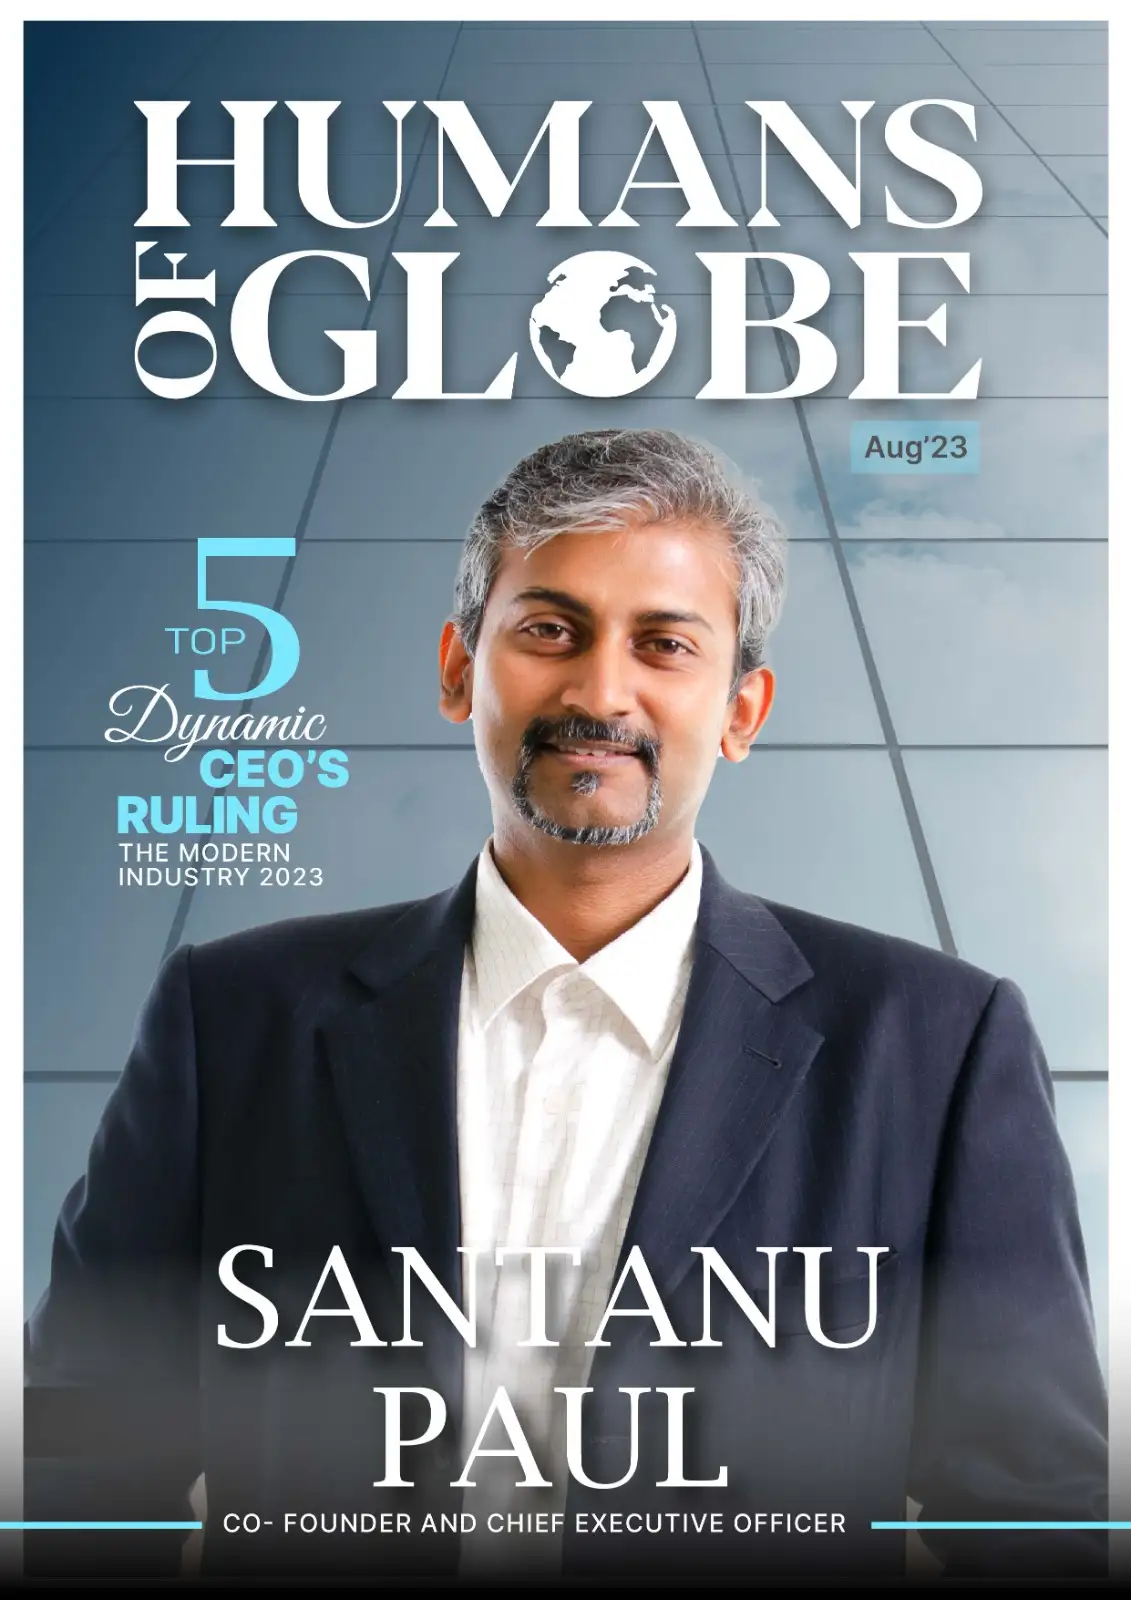 Top 5 Dynamic CEO's Ruling the Modern Industry 2023 - Cover